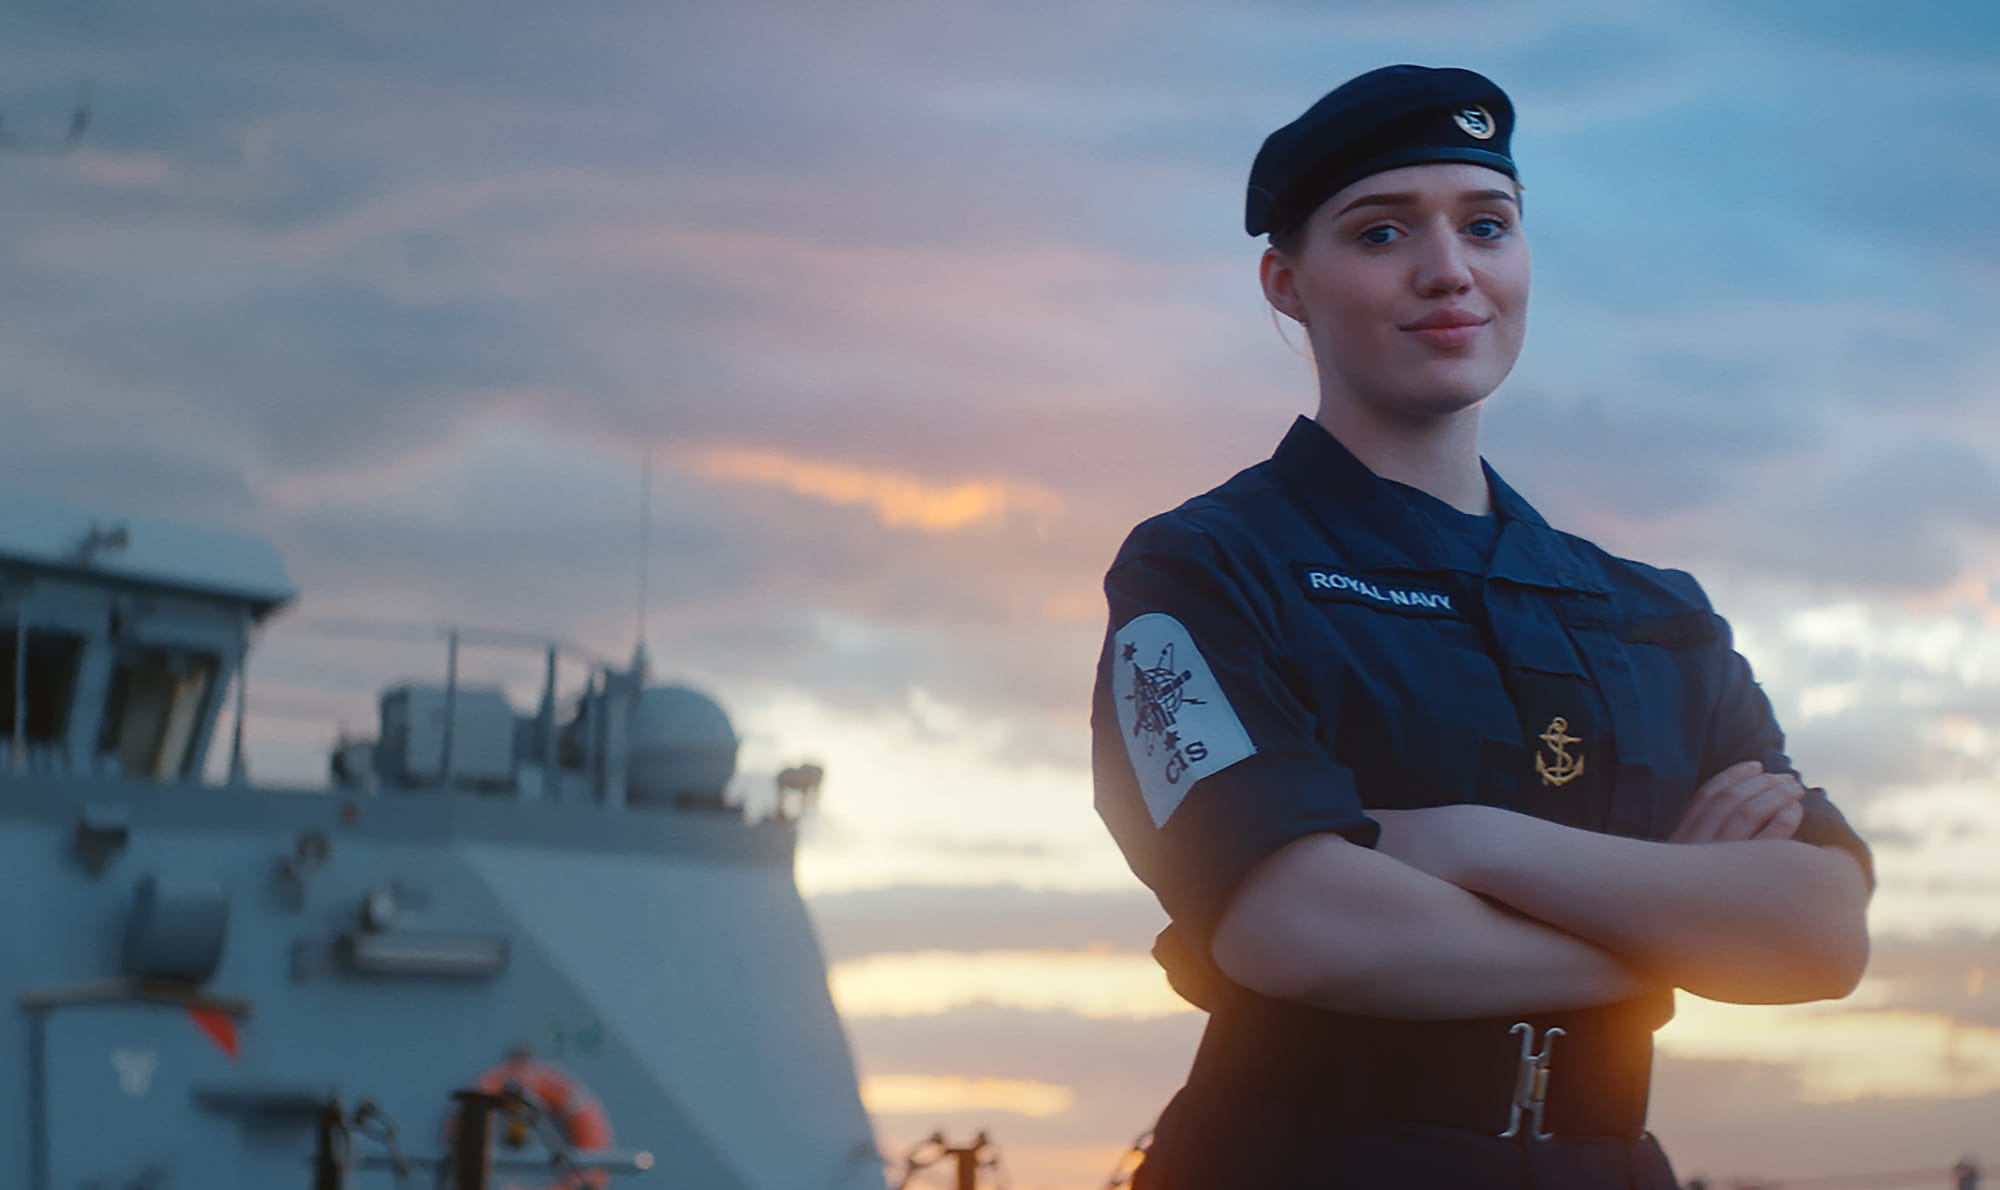 A Royal Navy crewmember wearing a blue beret stands on the deck proudly looking at the camera